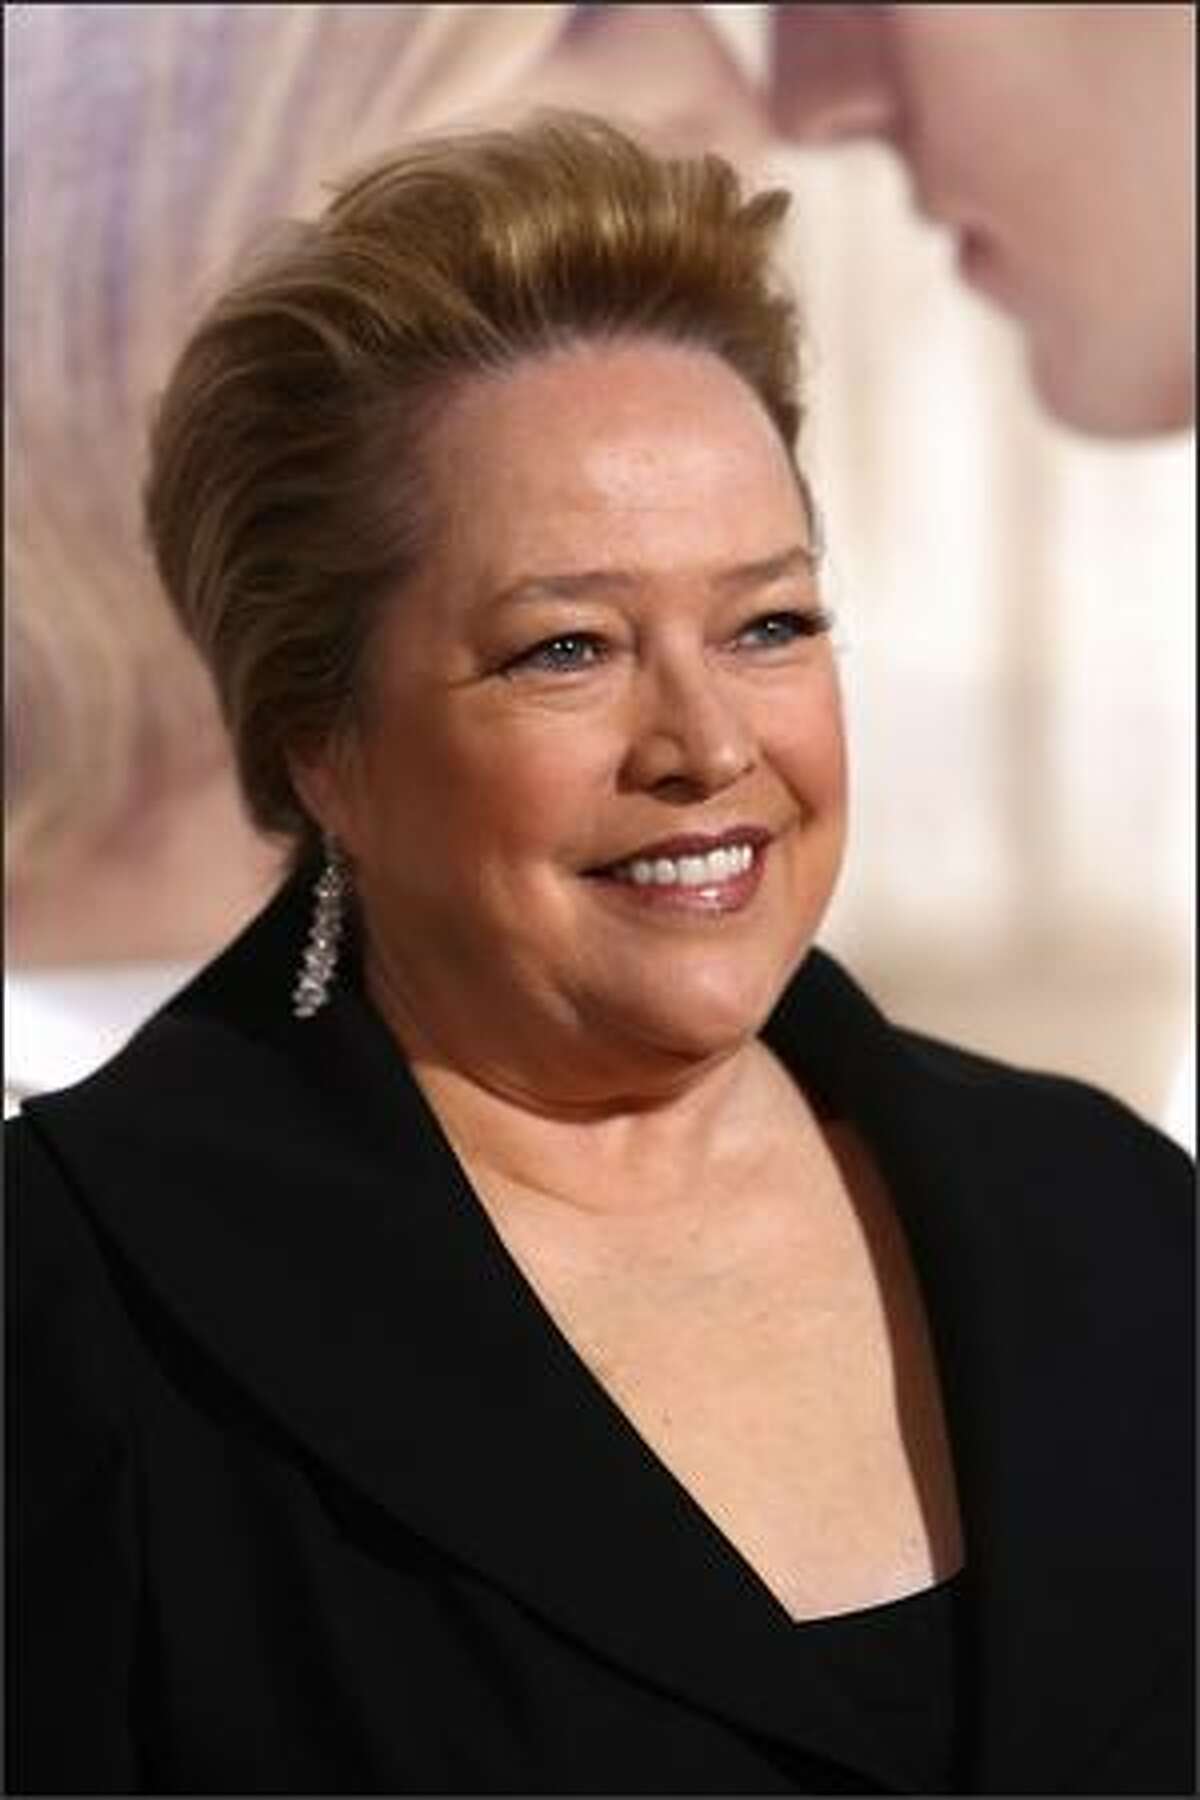 Actress Kathy Bates arrives at Paramount Vantage's Los Angeles premiere of 'Revolutionary Road' held at Mann Village Theater in Westwood, California.